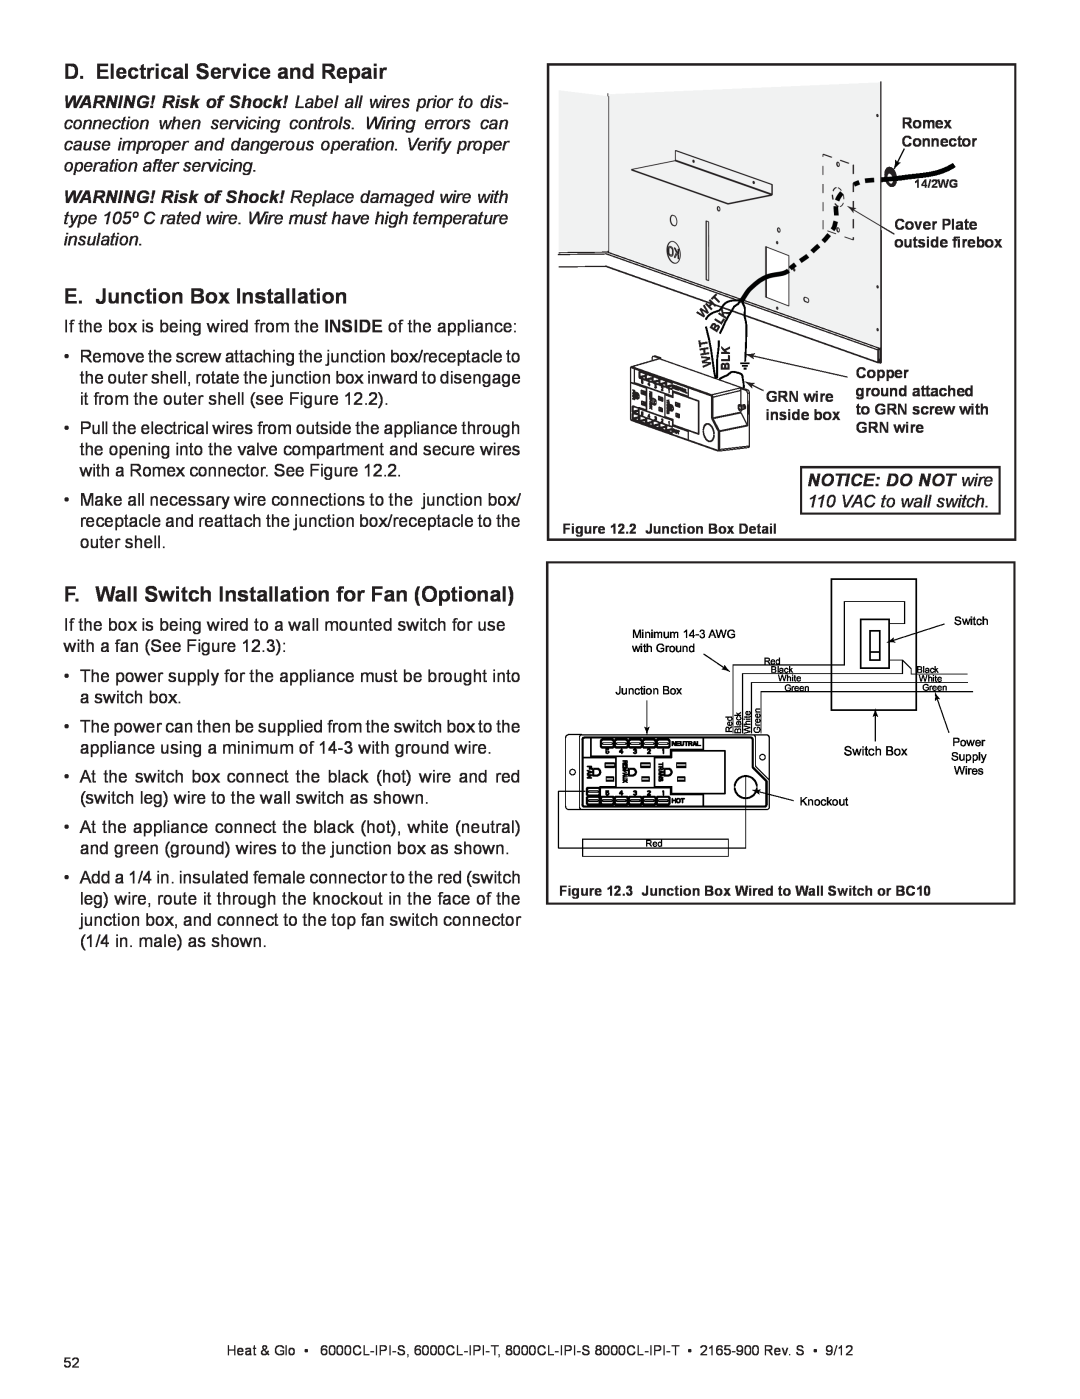 Heat & Glo LifeStyle 8000CL-IPI-S manual D. Electrical Service and Repair, E. Junction Box Installation, NOTICE DO NOT wire 